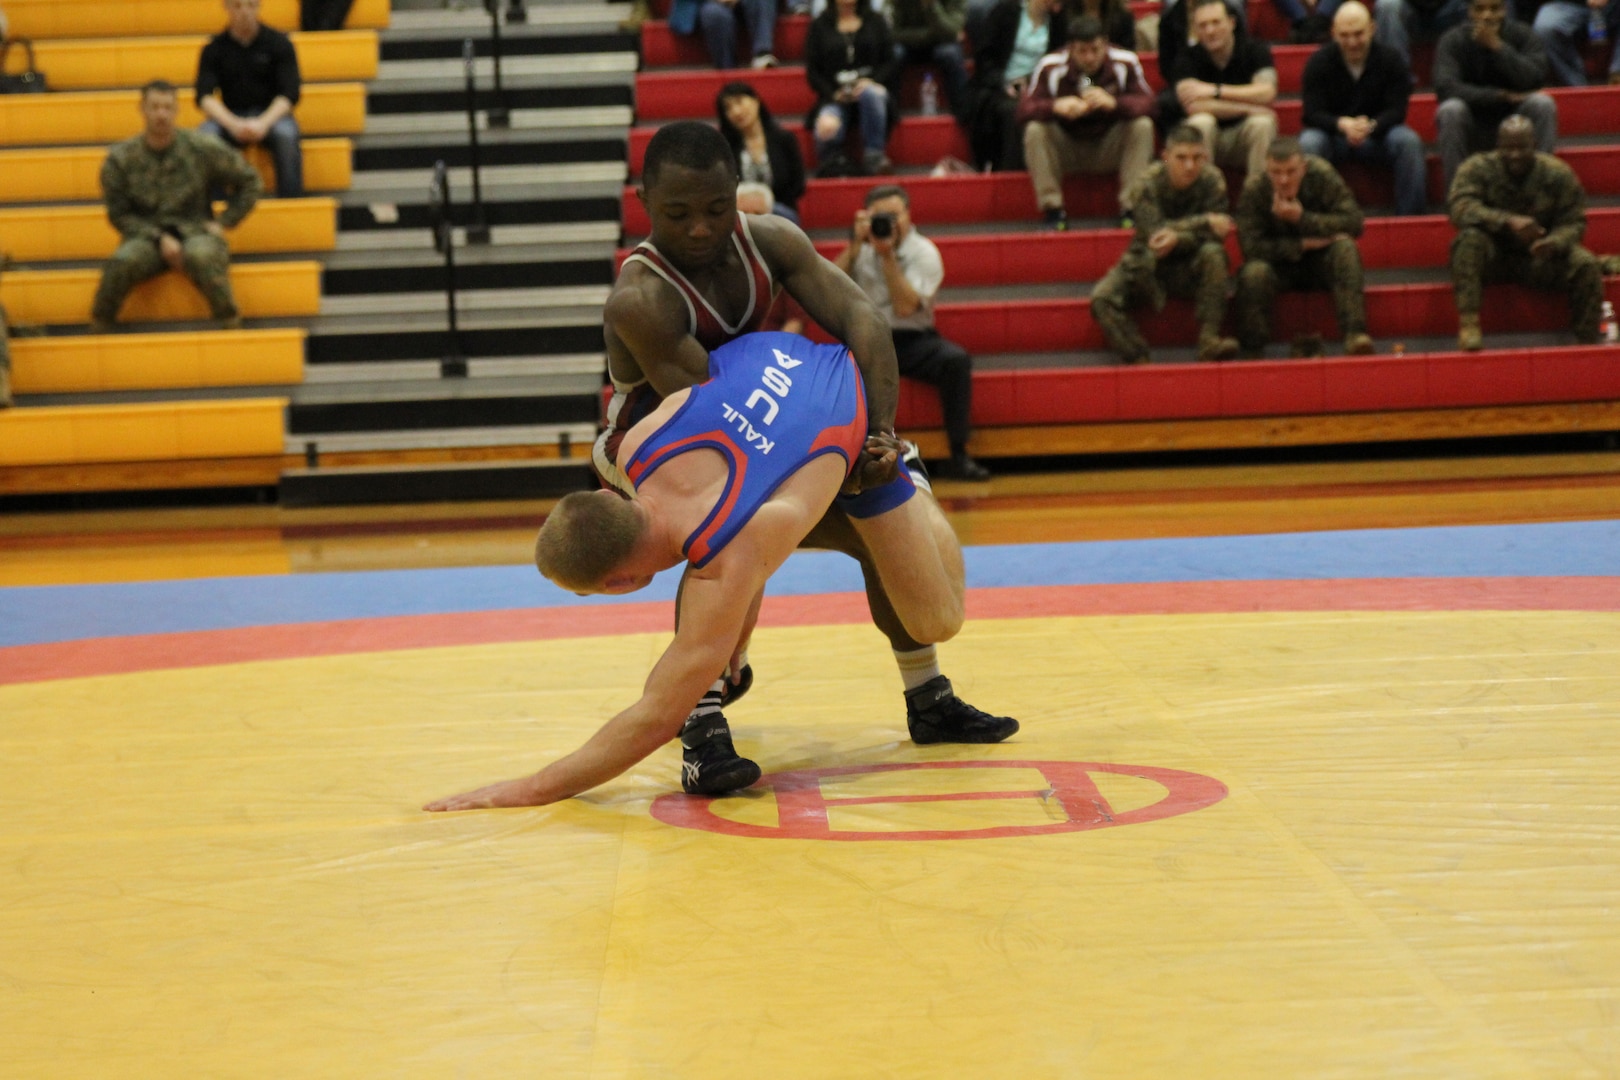 Two-time Olympian Army SGT Spencer Mango (Fort Carson, CO) throws Marine 2ndLt Aaron Kalil (Camp Lejeune, NC) during Greco-Roman competition.  Mango defeated Kalil 8-0 to win the first of his two Armed Forces gold medals (other in Freestyle) during the 2014 Armed Forces Wrestling Championship at MCB Camp Lejeune, NC 7-8 March.  